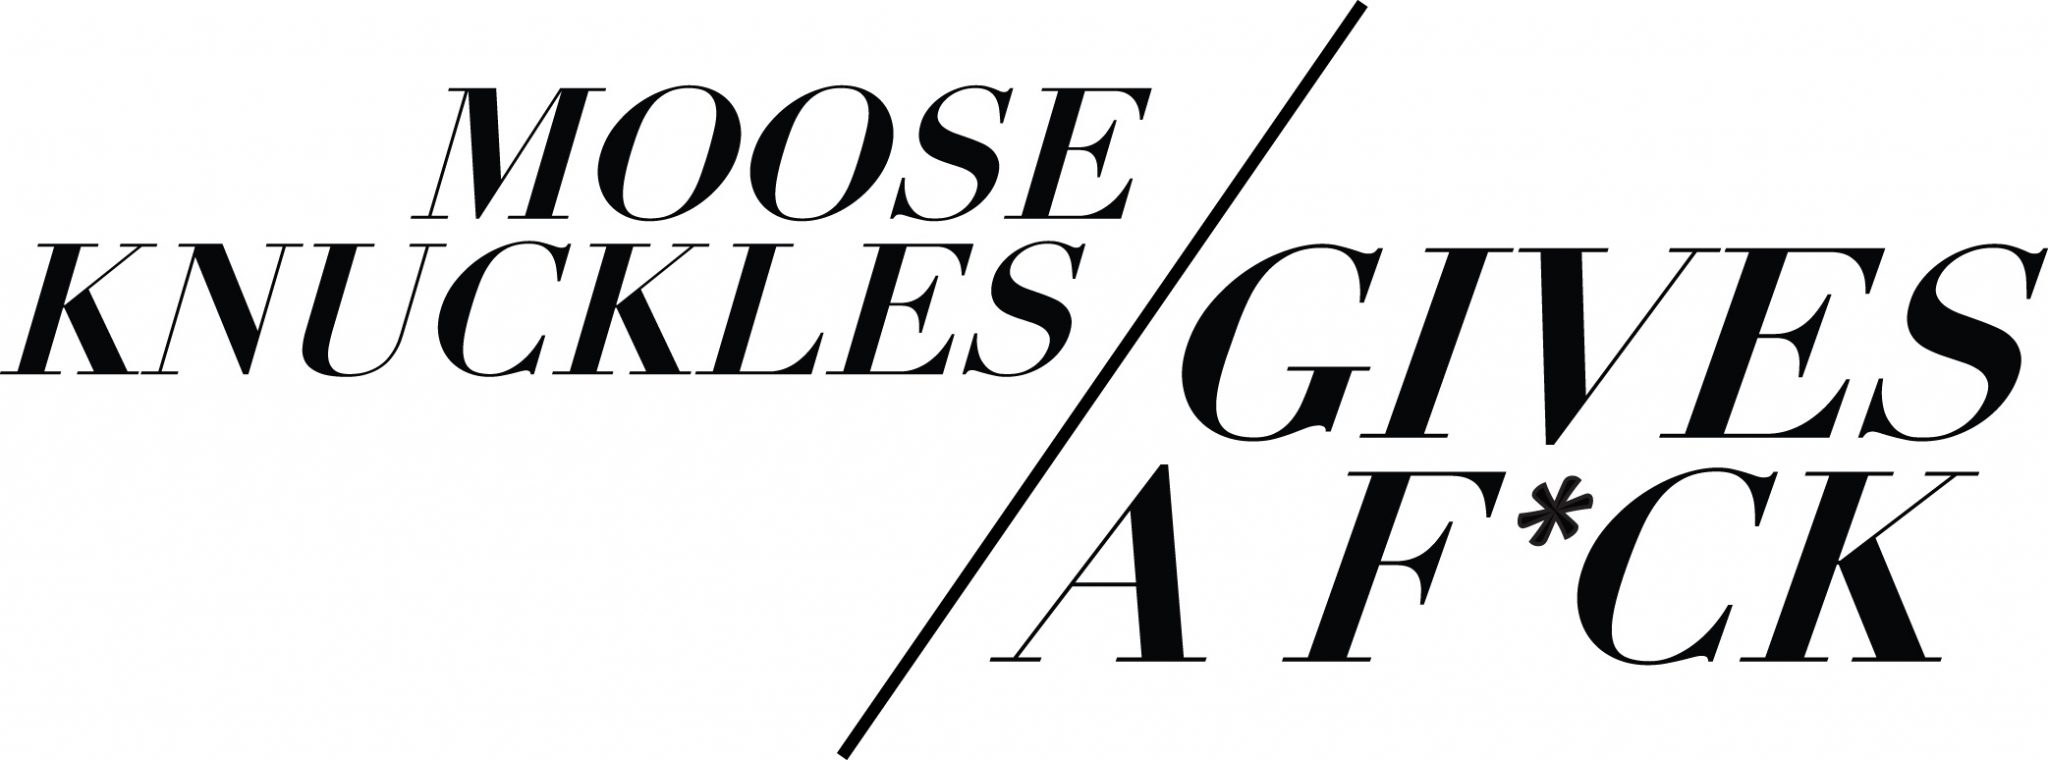 Montreal-based, Moose Knuckles announce a collaboration with visual artists...